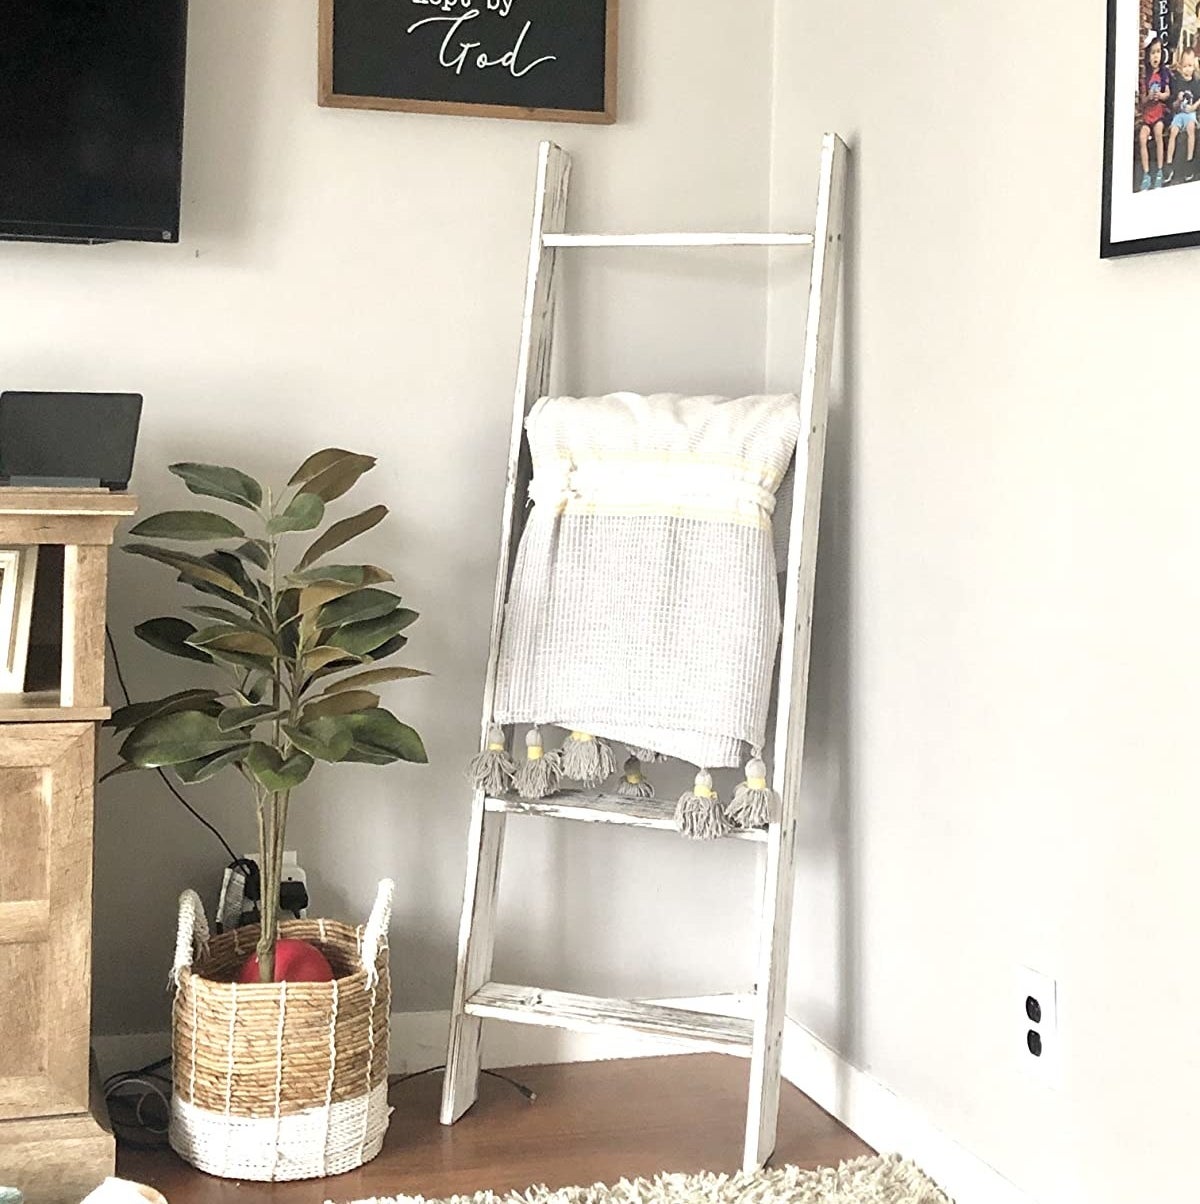 the ladder in white holding a blanket